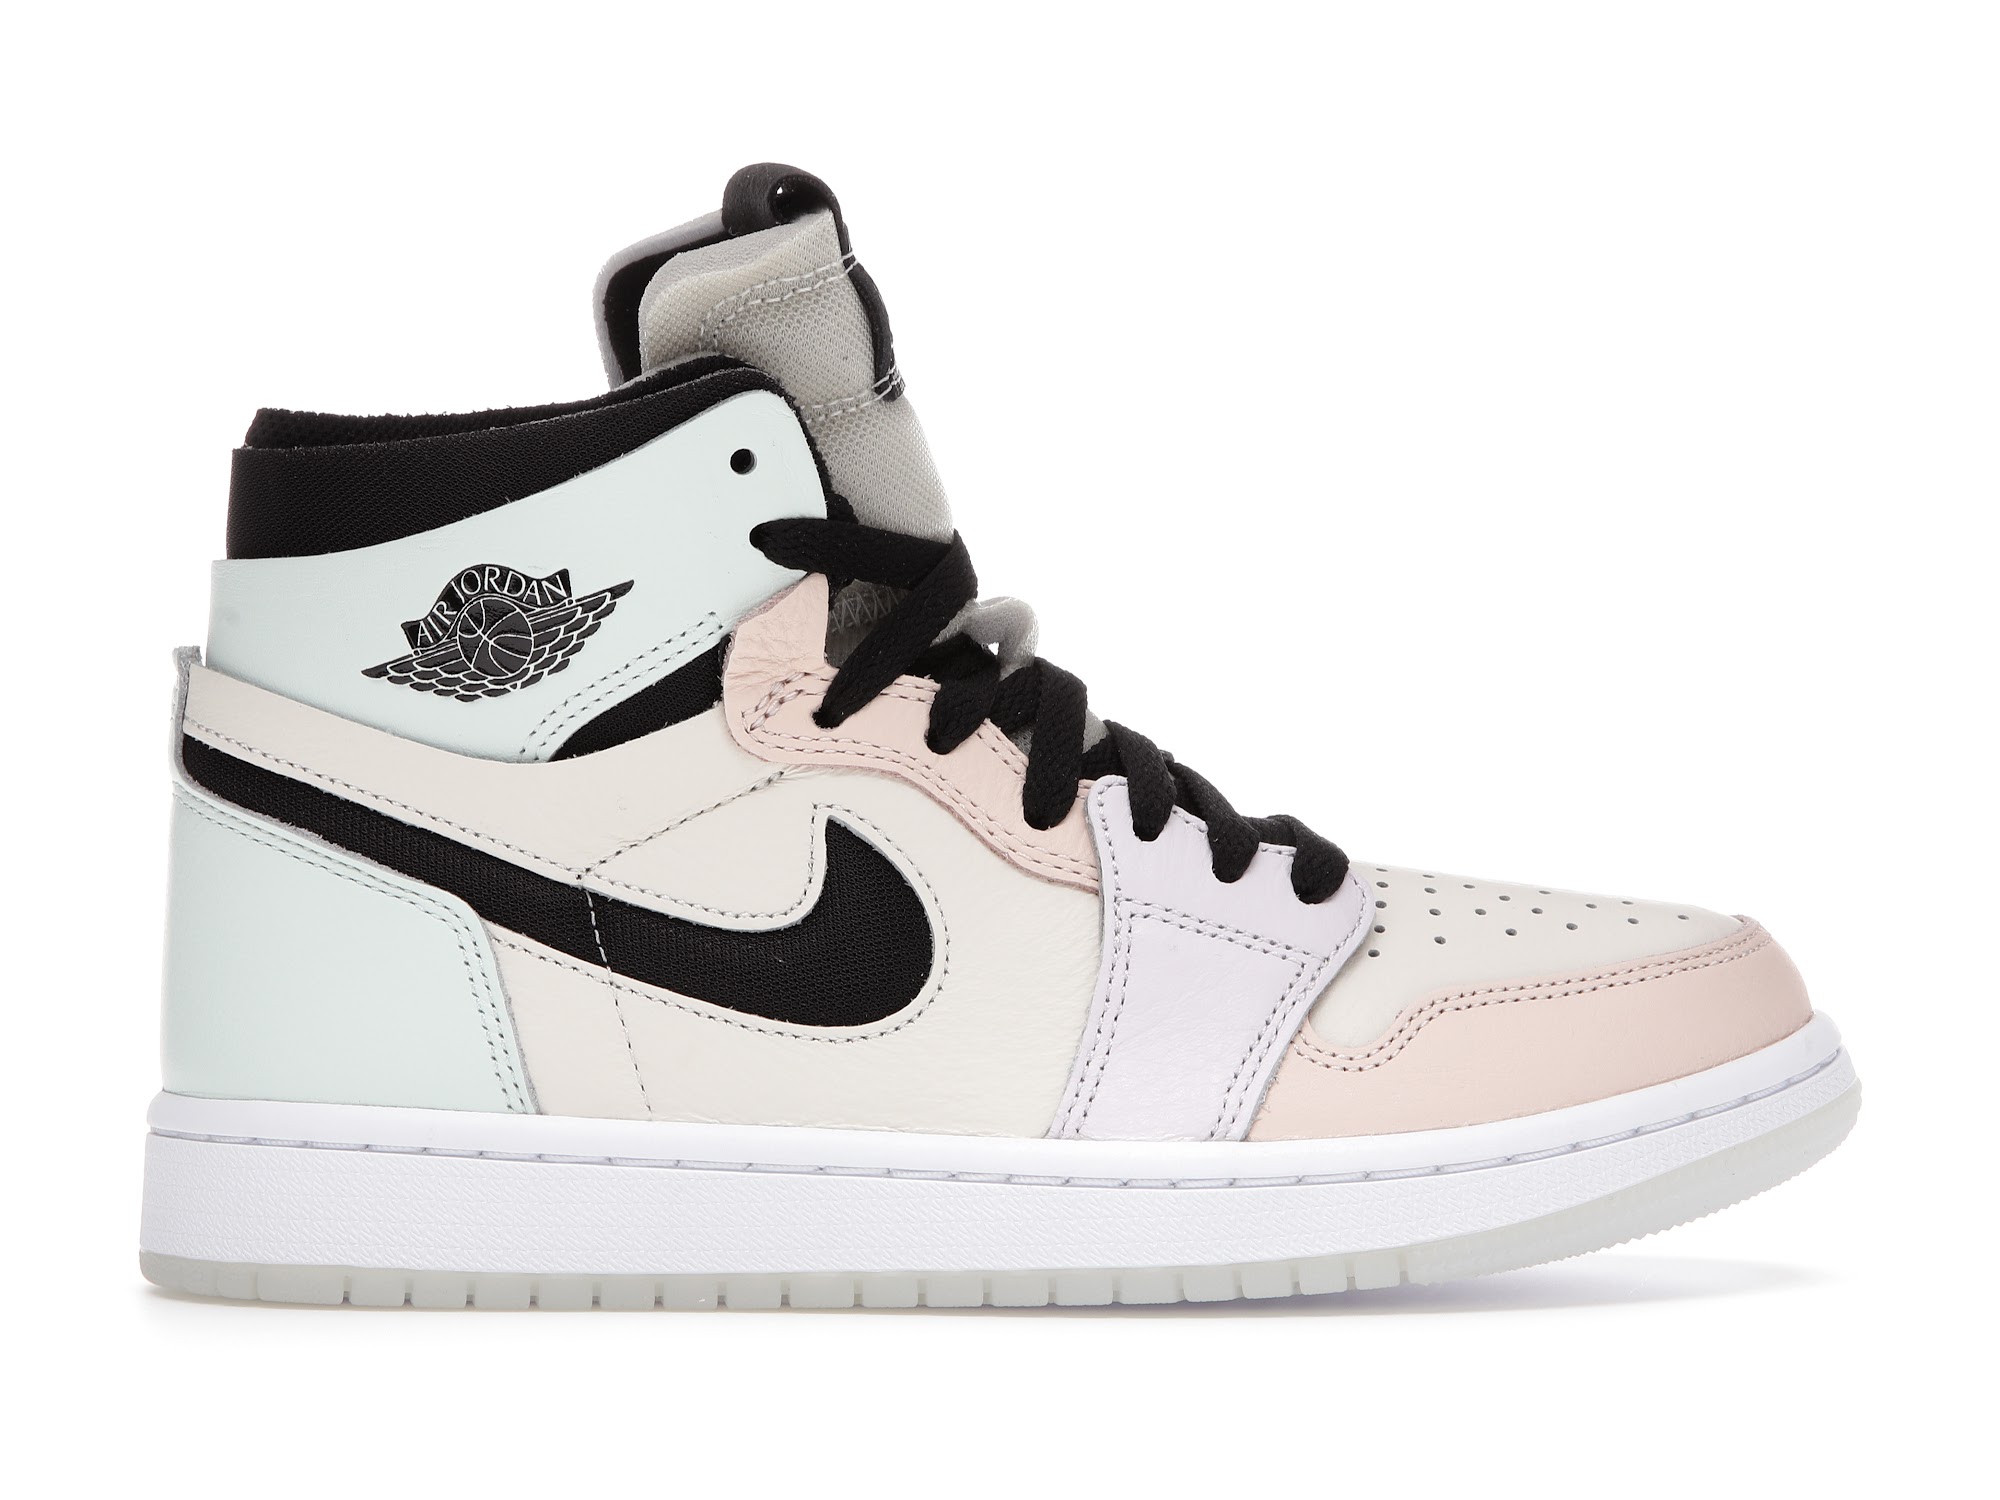 The Easter Jordans 2021 new Zealand, SAVE 36% - www.outofstock.be